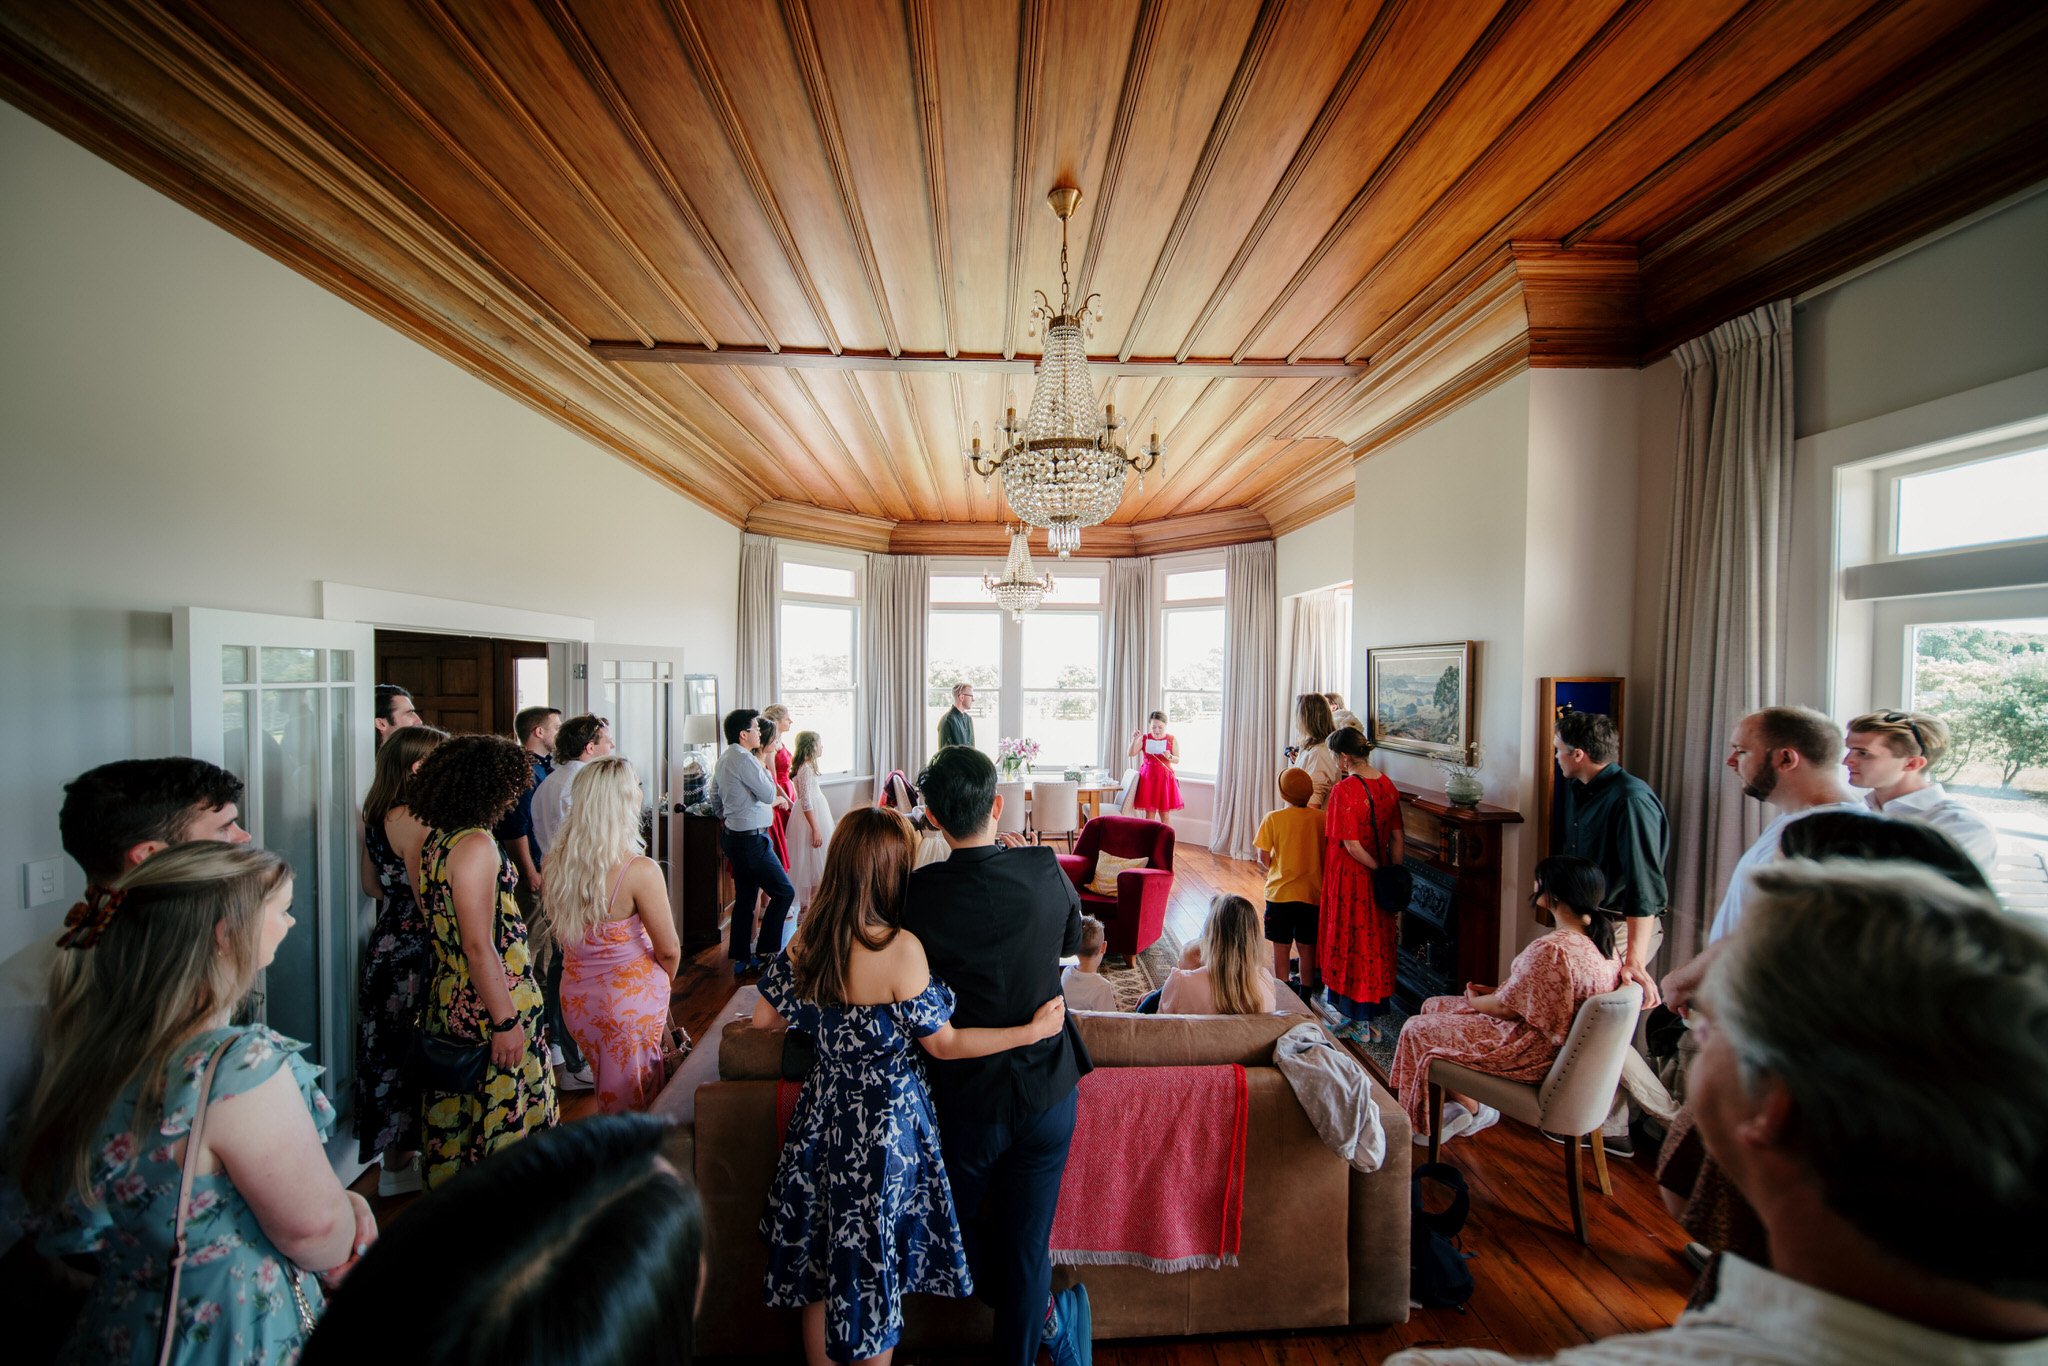 huntly-house-auckland-wedding-venue-mansion-vintage-luxury-accommodation-photographer-videography-dear-white-productions-photo-film-south-clarks-beach (11).jpg